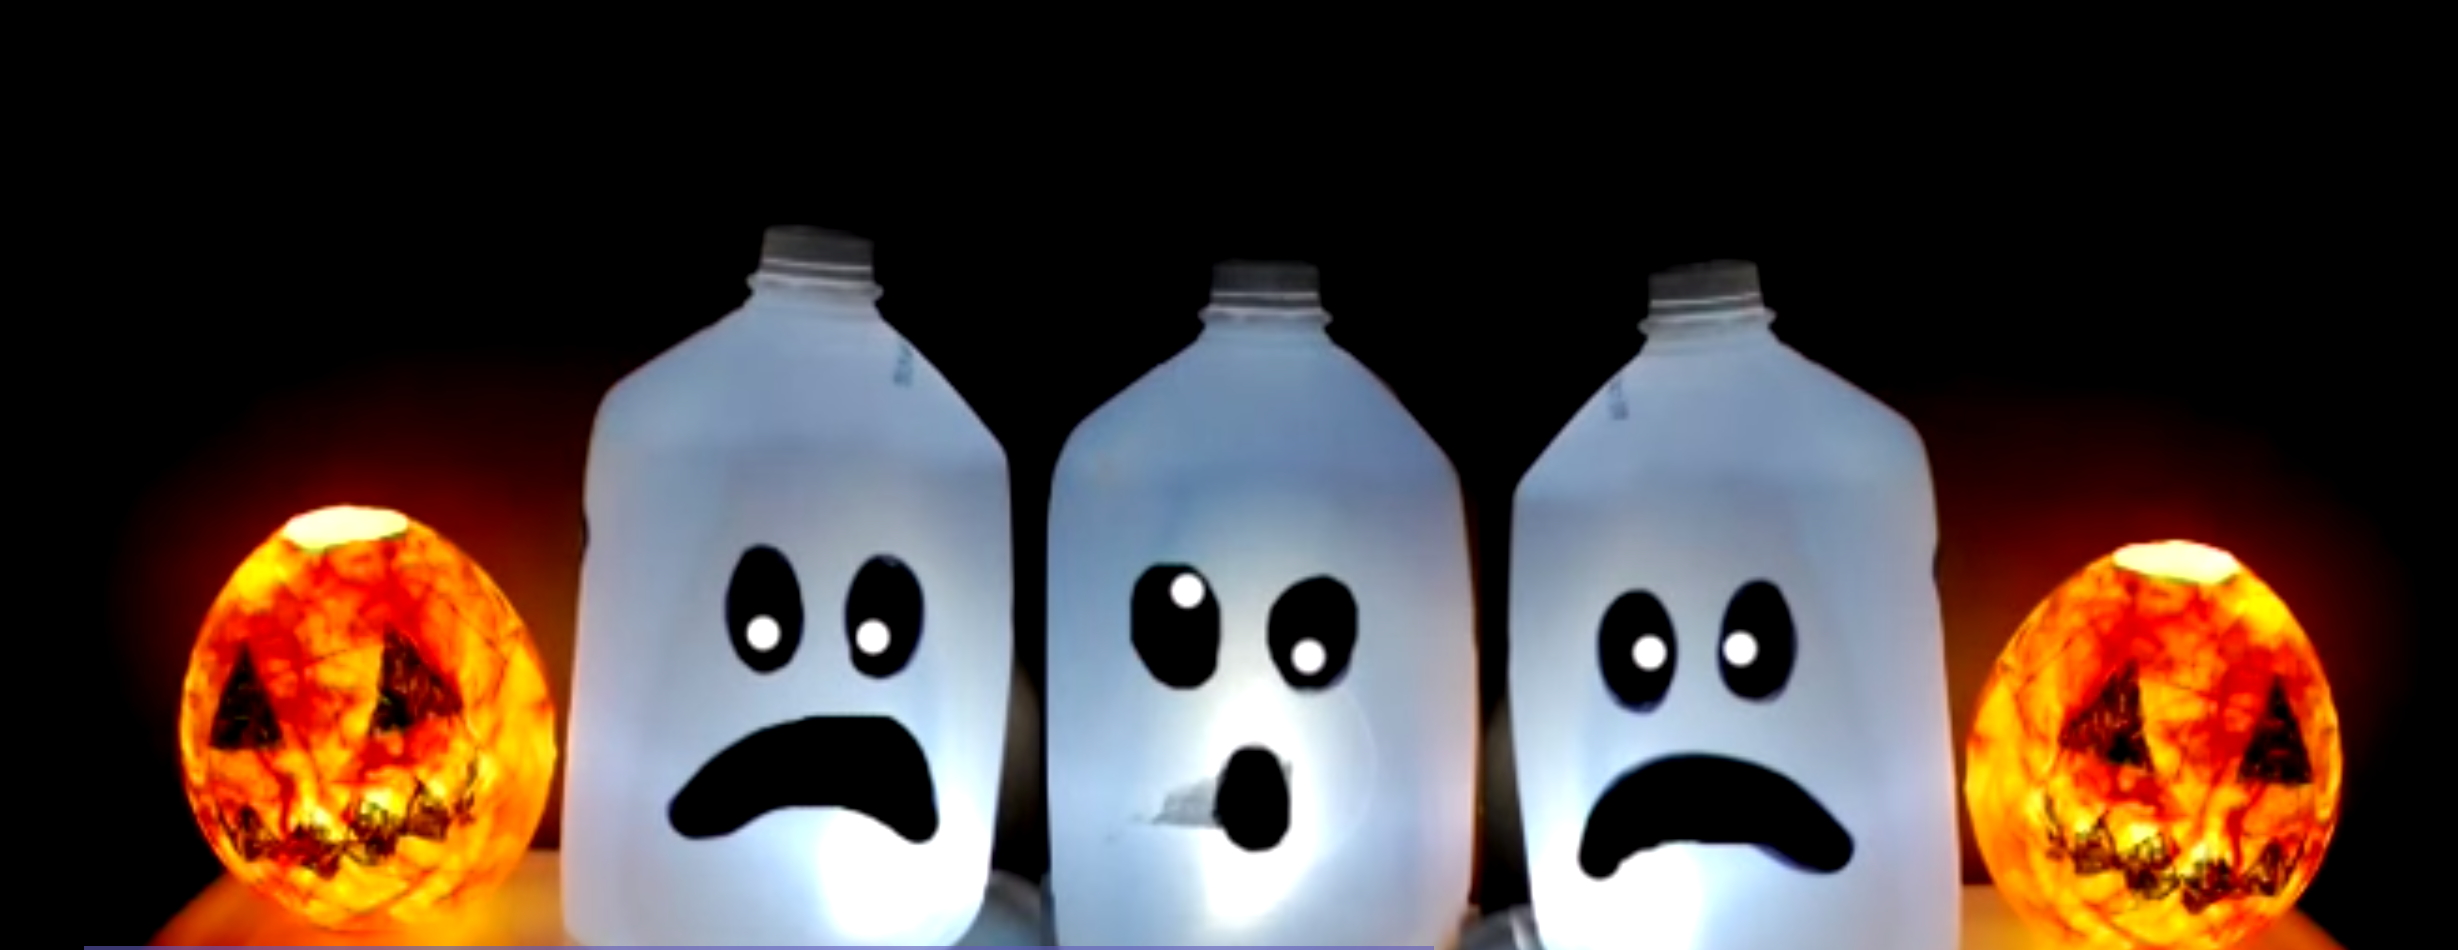 Milk Jug Halloween Decorations made of used milk jugs. How cute is this idea for Halloween? Love it! So easy to make. Watch the video to learn how.